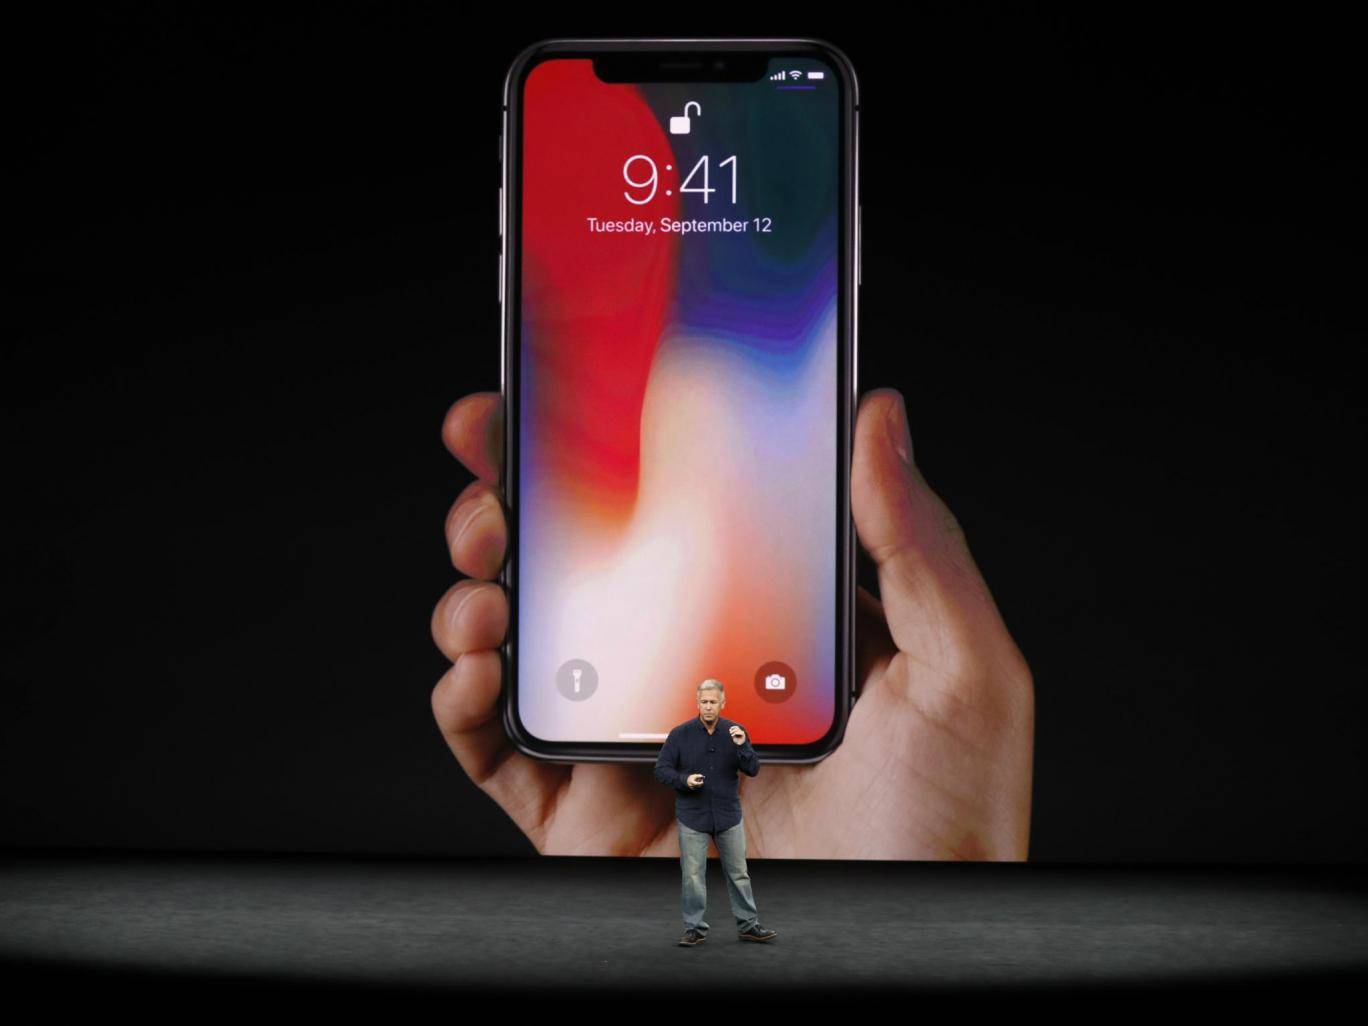 iPhone X malfunctions at launch - Apple